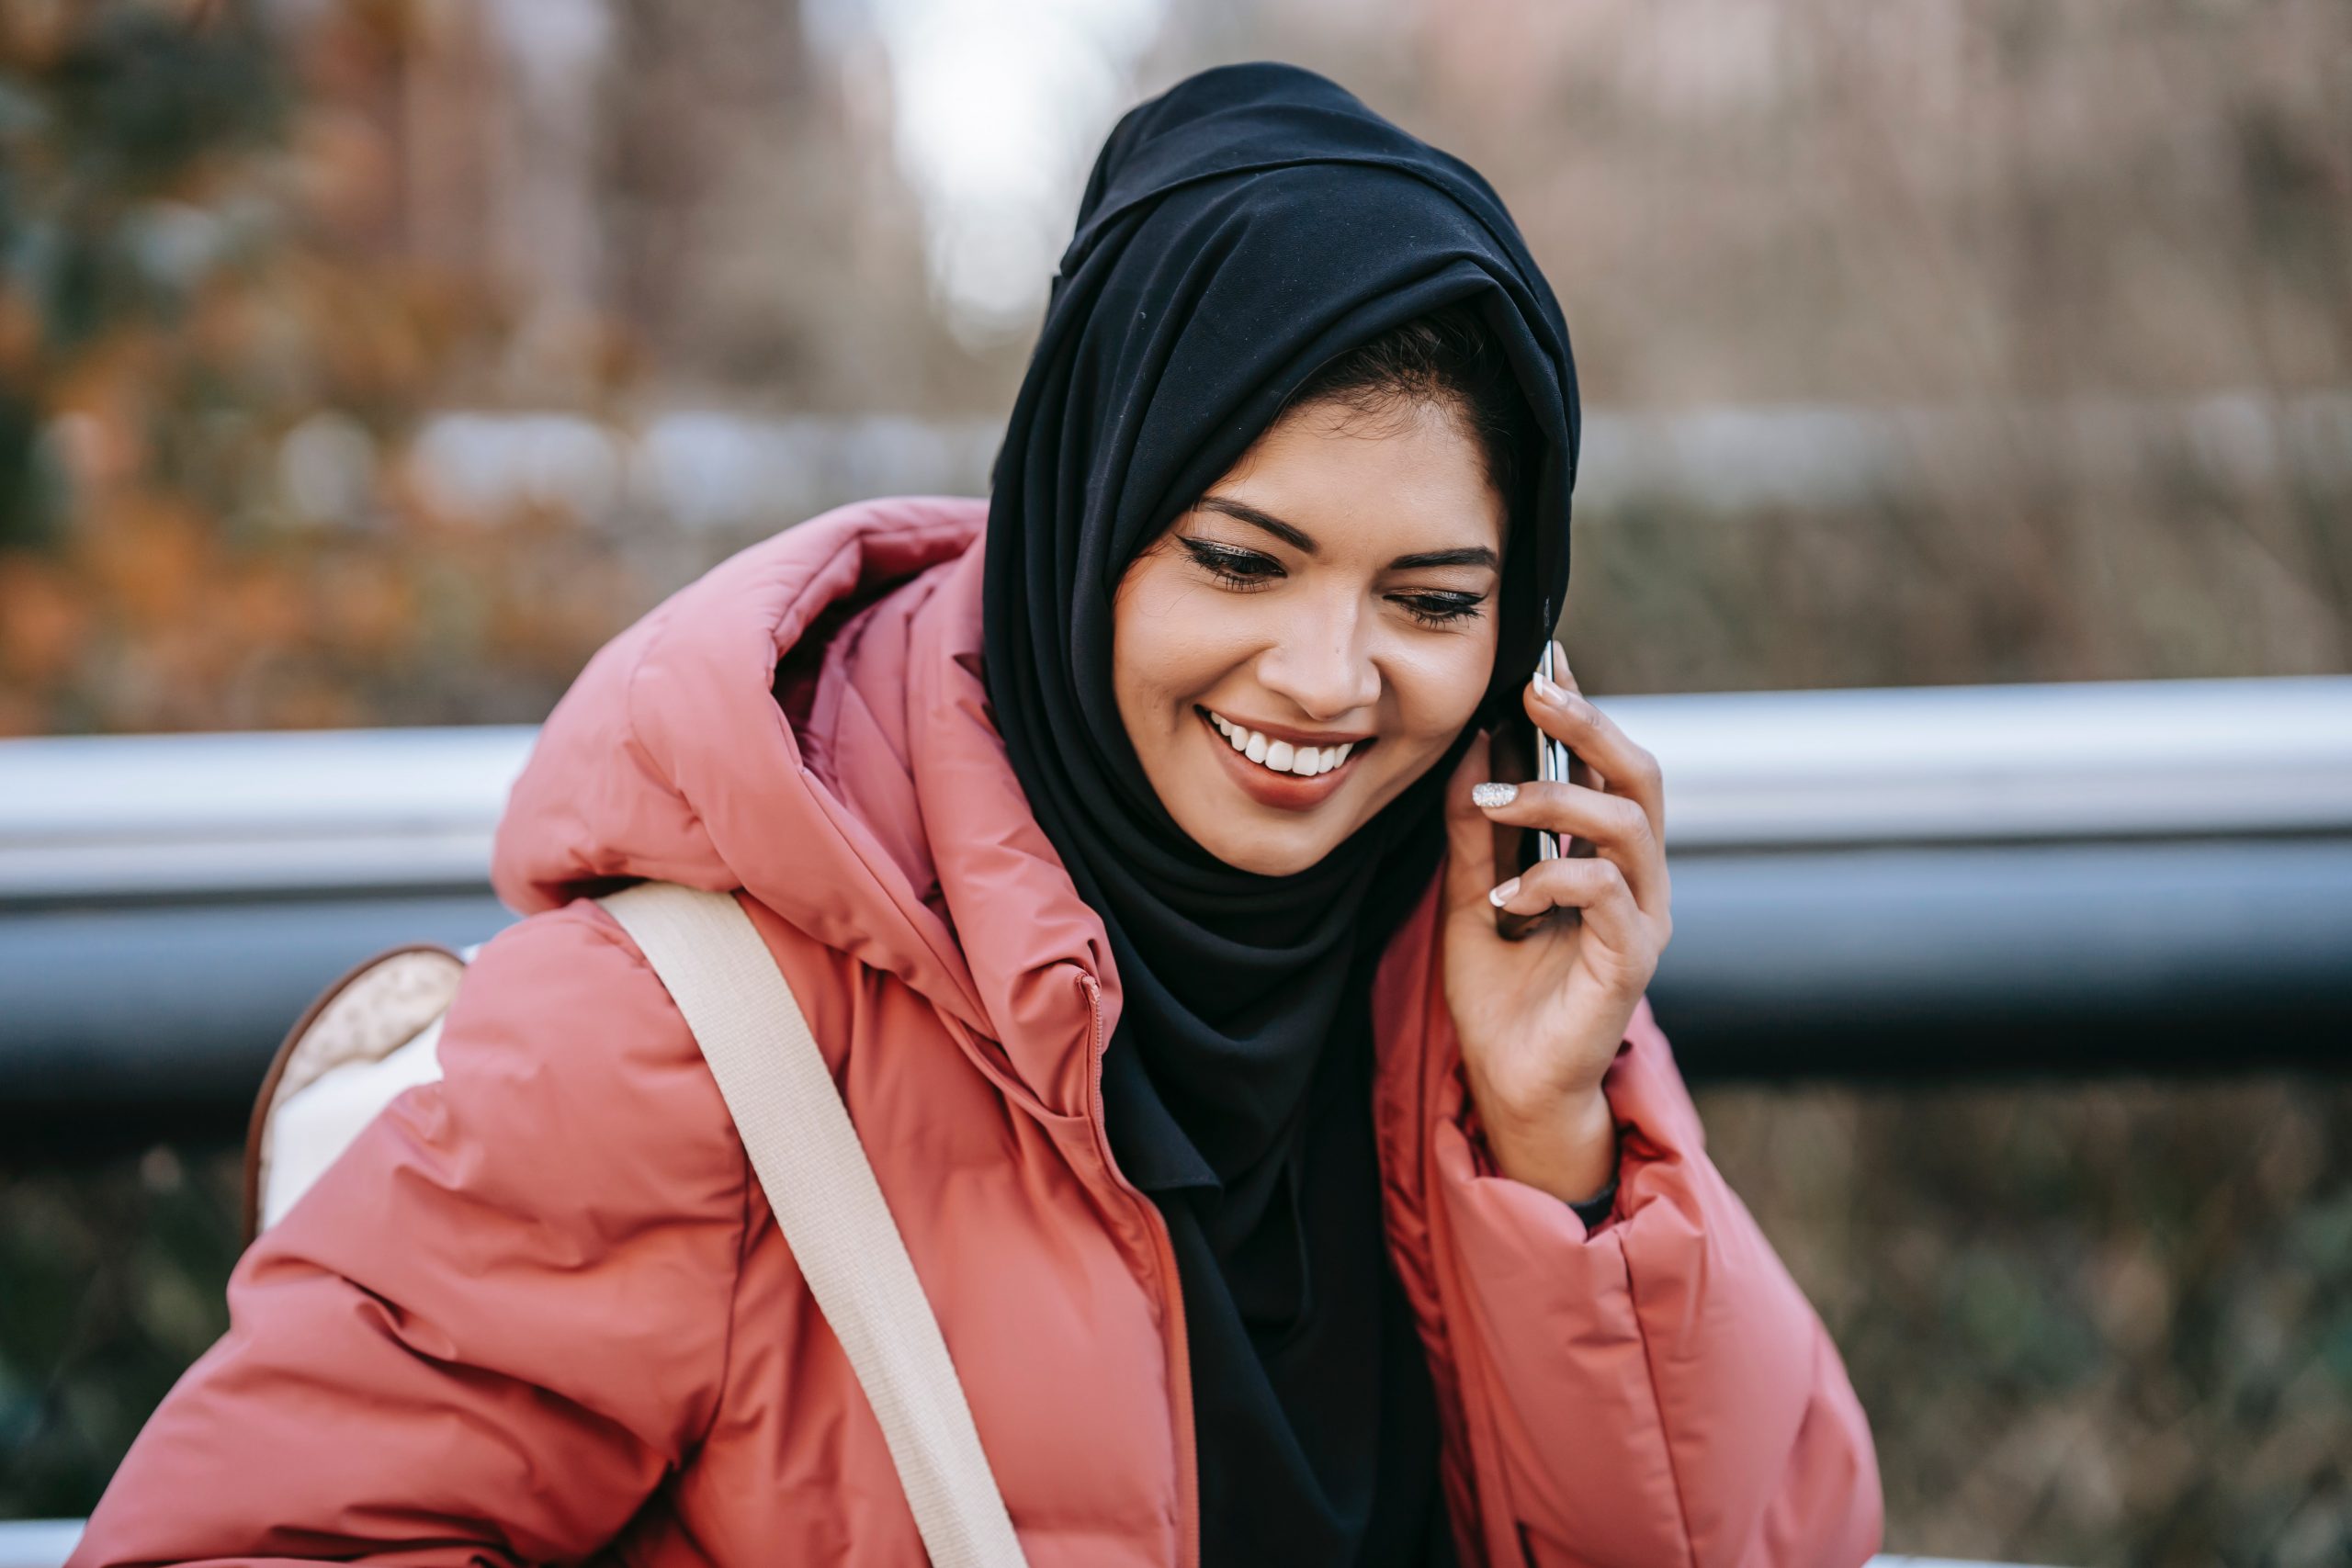 A young woman in a headscarf stands outside. She is holding a smartphone to her ear and smiling broadly.